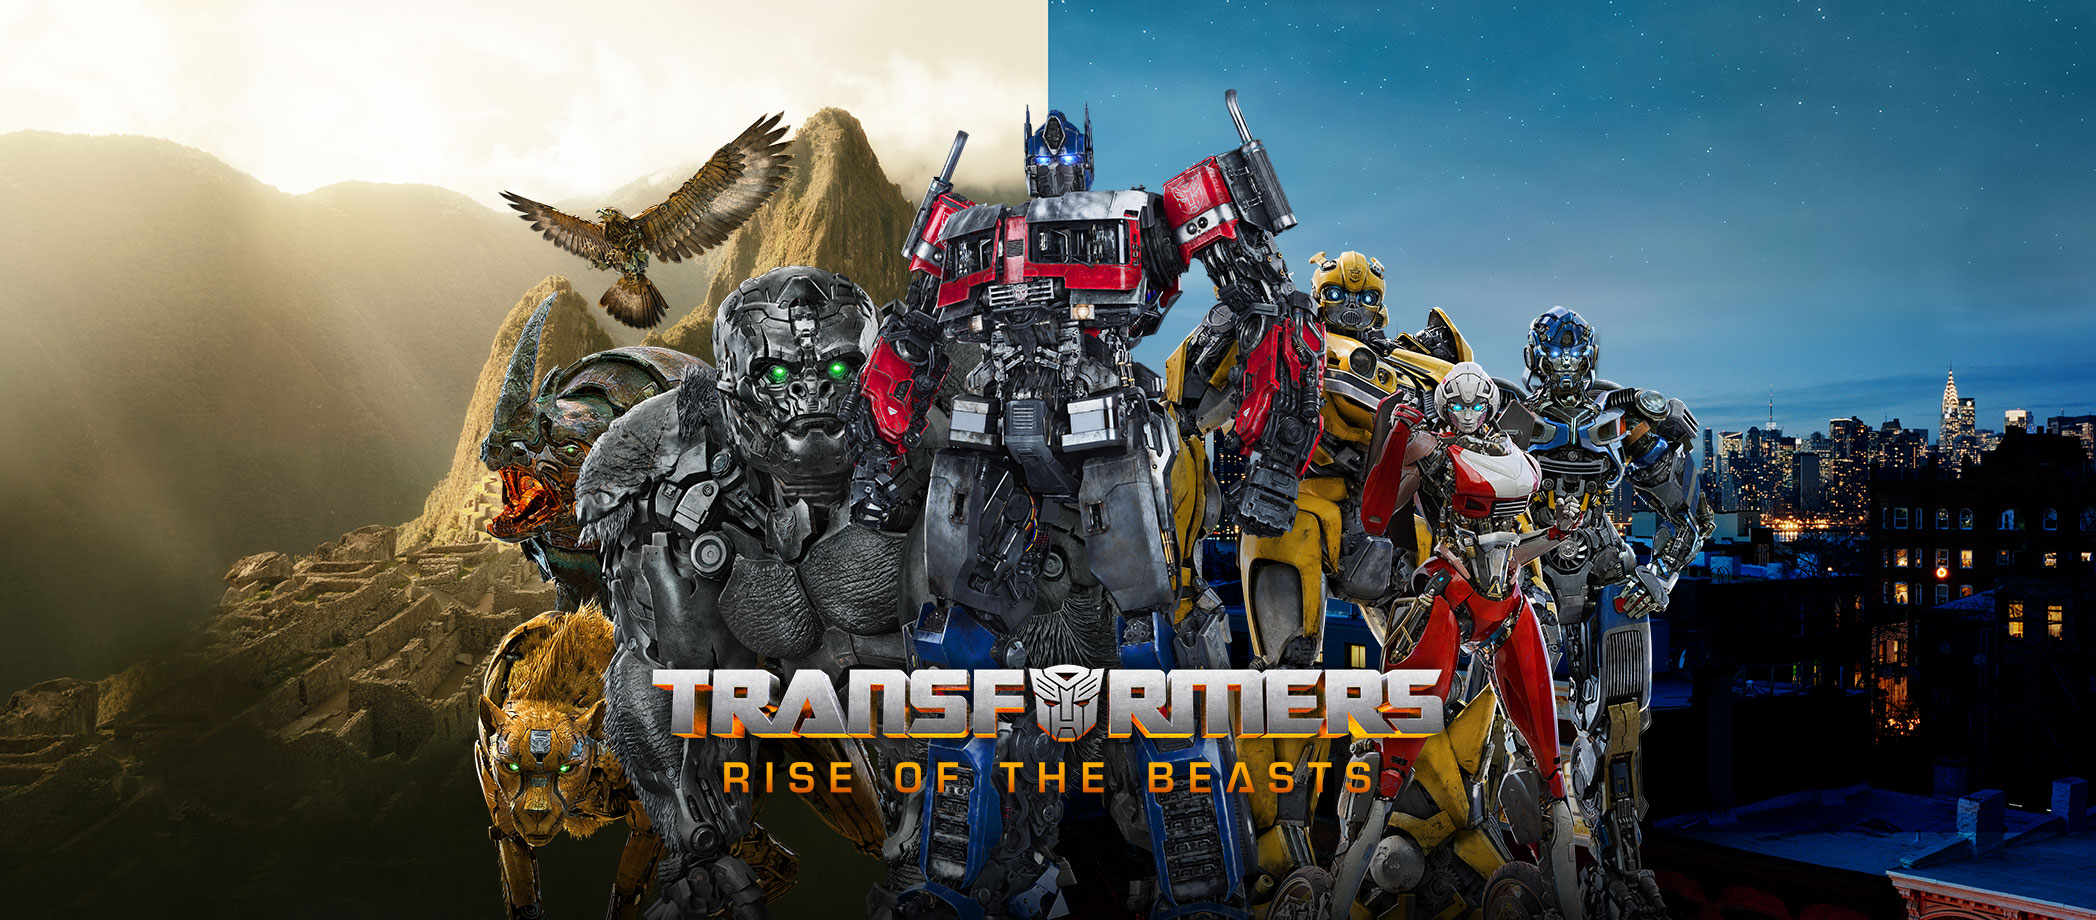 Transformers: Rise Of The Beasts New Promotional Poster